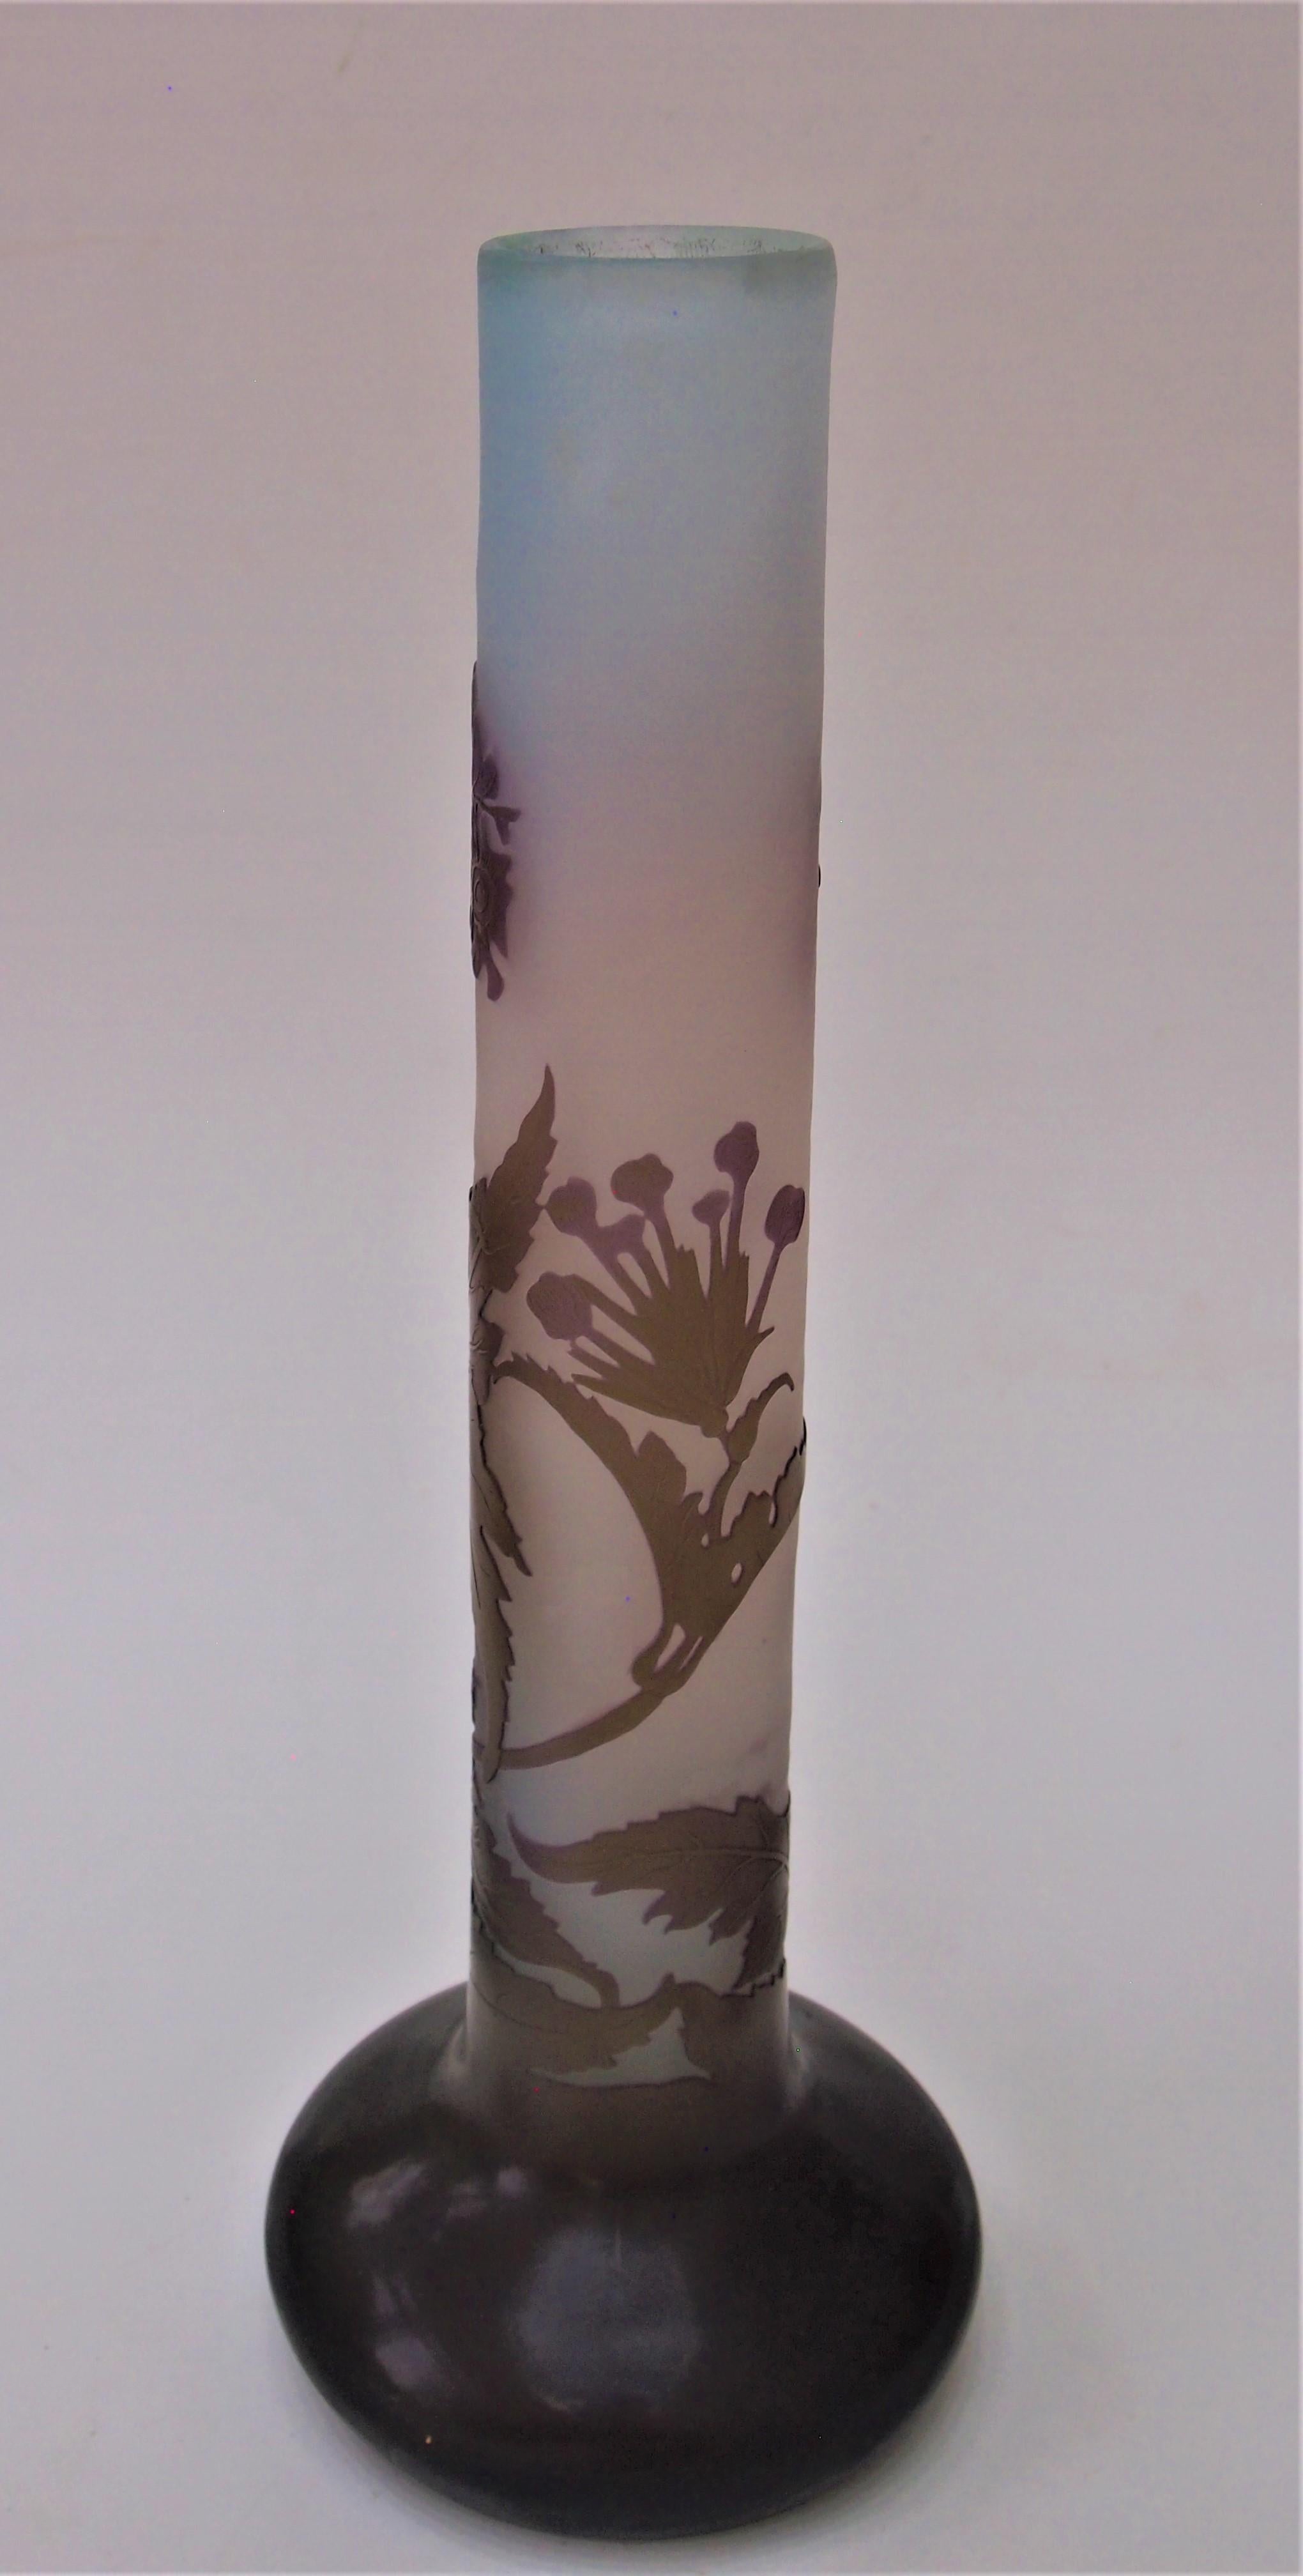 French Art Nouveau Emile Galle Cameo Glass Vervain Blossom Vase c1908 In Good Condition For Sale In Worcester Park, GB